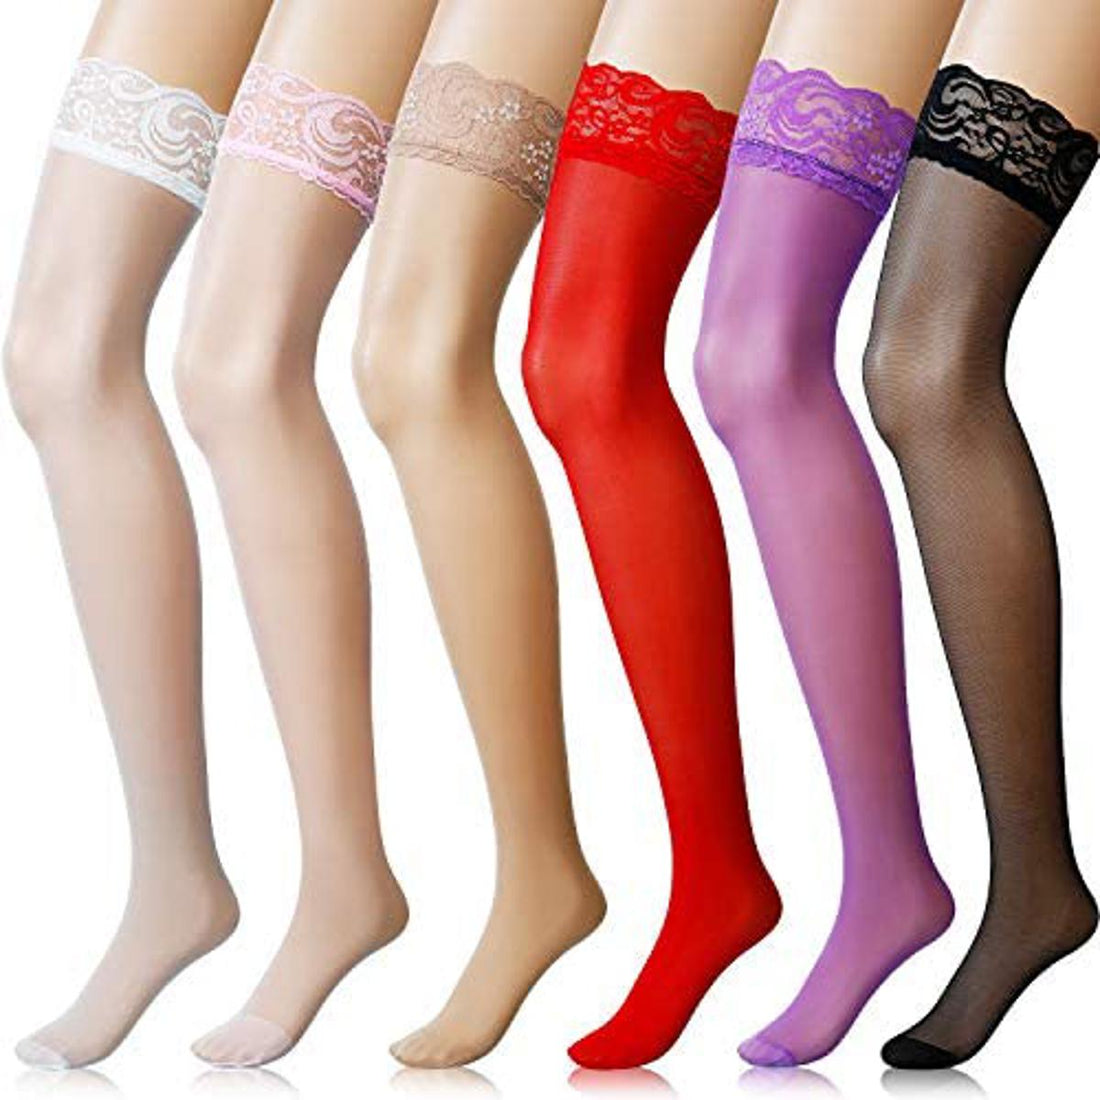 Some of the Benefits to Wear Stockings for Women